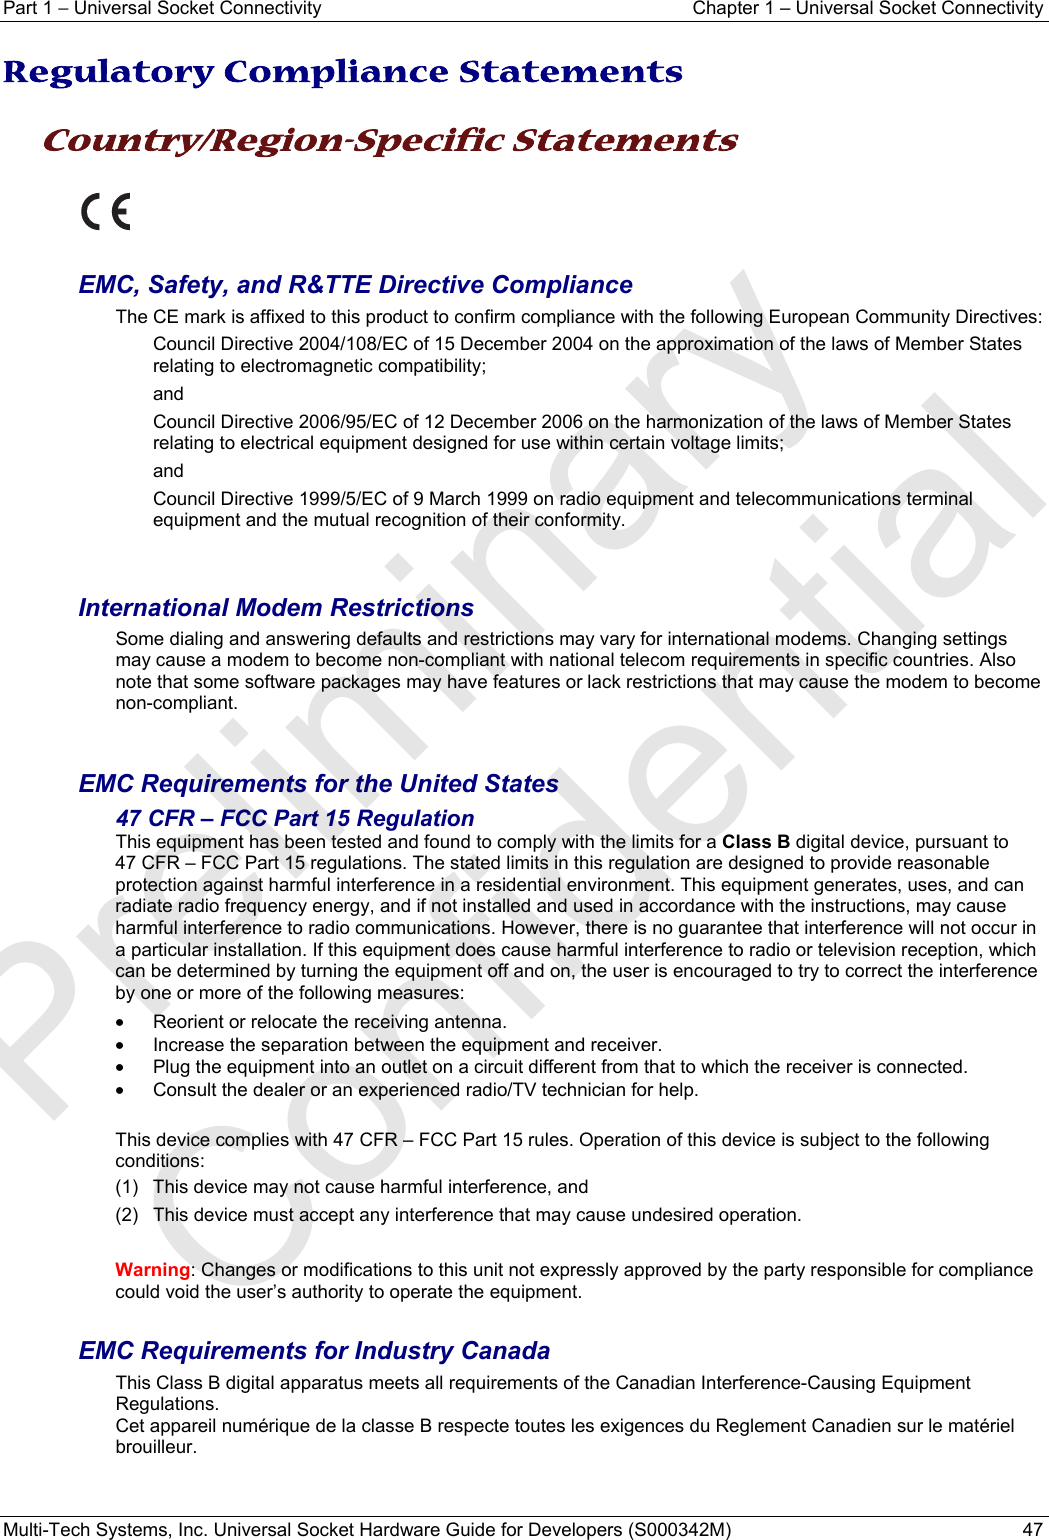 Part 1 − Universal Socket Connectivity  Chapter 1 – Universal Socket Connectivity Multi-Tech Systems, Inc. Universal Socket Hardware Guide for Developers (S000342M)  47  Regulatory Compliance Statements  Country/Region-Specific Statements    EMC, Safety, and R&amp;TTE Directive Compliance The CE mark is affixed to this product to confirm compliance with the following European Community Directives: Council Directive 2004/108/EC of 15 December 2004 on the approximation of the laws of Member States relating to electromagnetic compatibility;  and Council Directive 2006/95/EC of 12 December 2006 on the harmonization of the laws of Member States relating to electrical equipment designed for use within certain voltage limits; and Council Directive 1999/5/EC of 9 March 1999 on radio equipment and telecommunications terminal equipment and the mutual recognition of their conformity.   International Modem Restrictions Some dialing and answering defaults and restrictions may vary for international modems. Changing settings may cause a modem to become non-compliant with national telecom requirements in specific countries. Also note that some software packages may have features or lack restrictions that may cause the modem to become non-compliant.   EMC Requirements for the United States 47 CFR – FCC Part 15 Regulation This equipment has been tested and found to comply with the limits for a Class B digital device, pursuant to  47 CFR – FCC Part 15 regulations. The stated limits in this regulation are designed to provide reasonable protection against harmful interference in a residential environment. This equipment generates, uses, and can radiate radio frequency energy, and if not installed and used in accordance with the instructions, may cause harmful interference to radio communications. However, there is no guarantee that interference will not occur in a particular installation. If this equipment does cause harmful interference to radio or television reception, which can be determined by turning the equipment off and on, the user is encouraged to try to correct the interference by one or more of the following measures:  •  Reorient or relocate the receiving antenna. •  Increase the separation between the equipment and receiver. •  Plug the equipment into an outlet on a circuit different from that to which the receiver is connected. •  Consult the dealer or an experienced radio/TV technician for help.  This device complies with 47 CFR – FCC Part 15 rules. Operation of this device is subject to the following conditions:  (1)  This device may not cause harmful interference, and  (2)  This device must accept any interference that may cause undesired operation.  Warning: Changes or modifications to this unit not expressly approved by the party responsible for compliance could void the user’s authority to operate the equipment.  EMC Requirements for Industry Canada This Class B digital apparatus meets all requirements of the Canadian Interference-Causing Equipment Regulations. Cet appareil numérique de la classe B respecte toutes les exigences du Reglement Canadien sur le matériel brouilleur.   Preliminary  Confidential